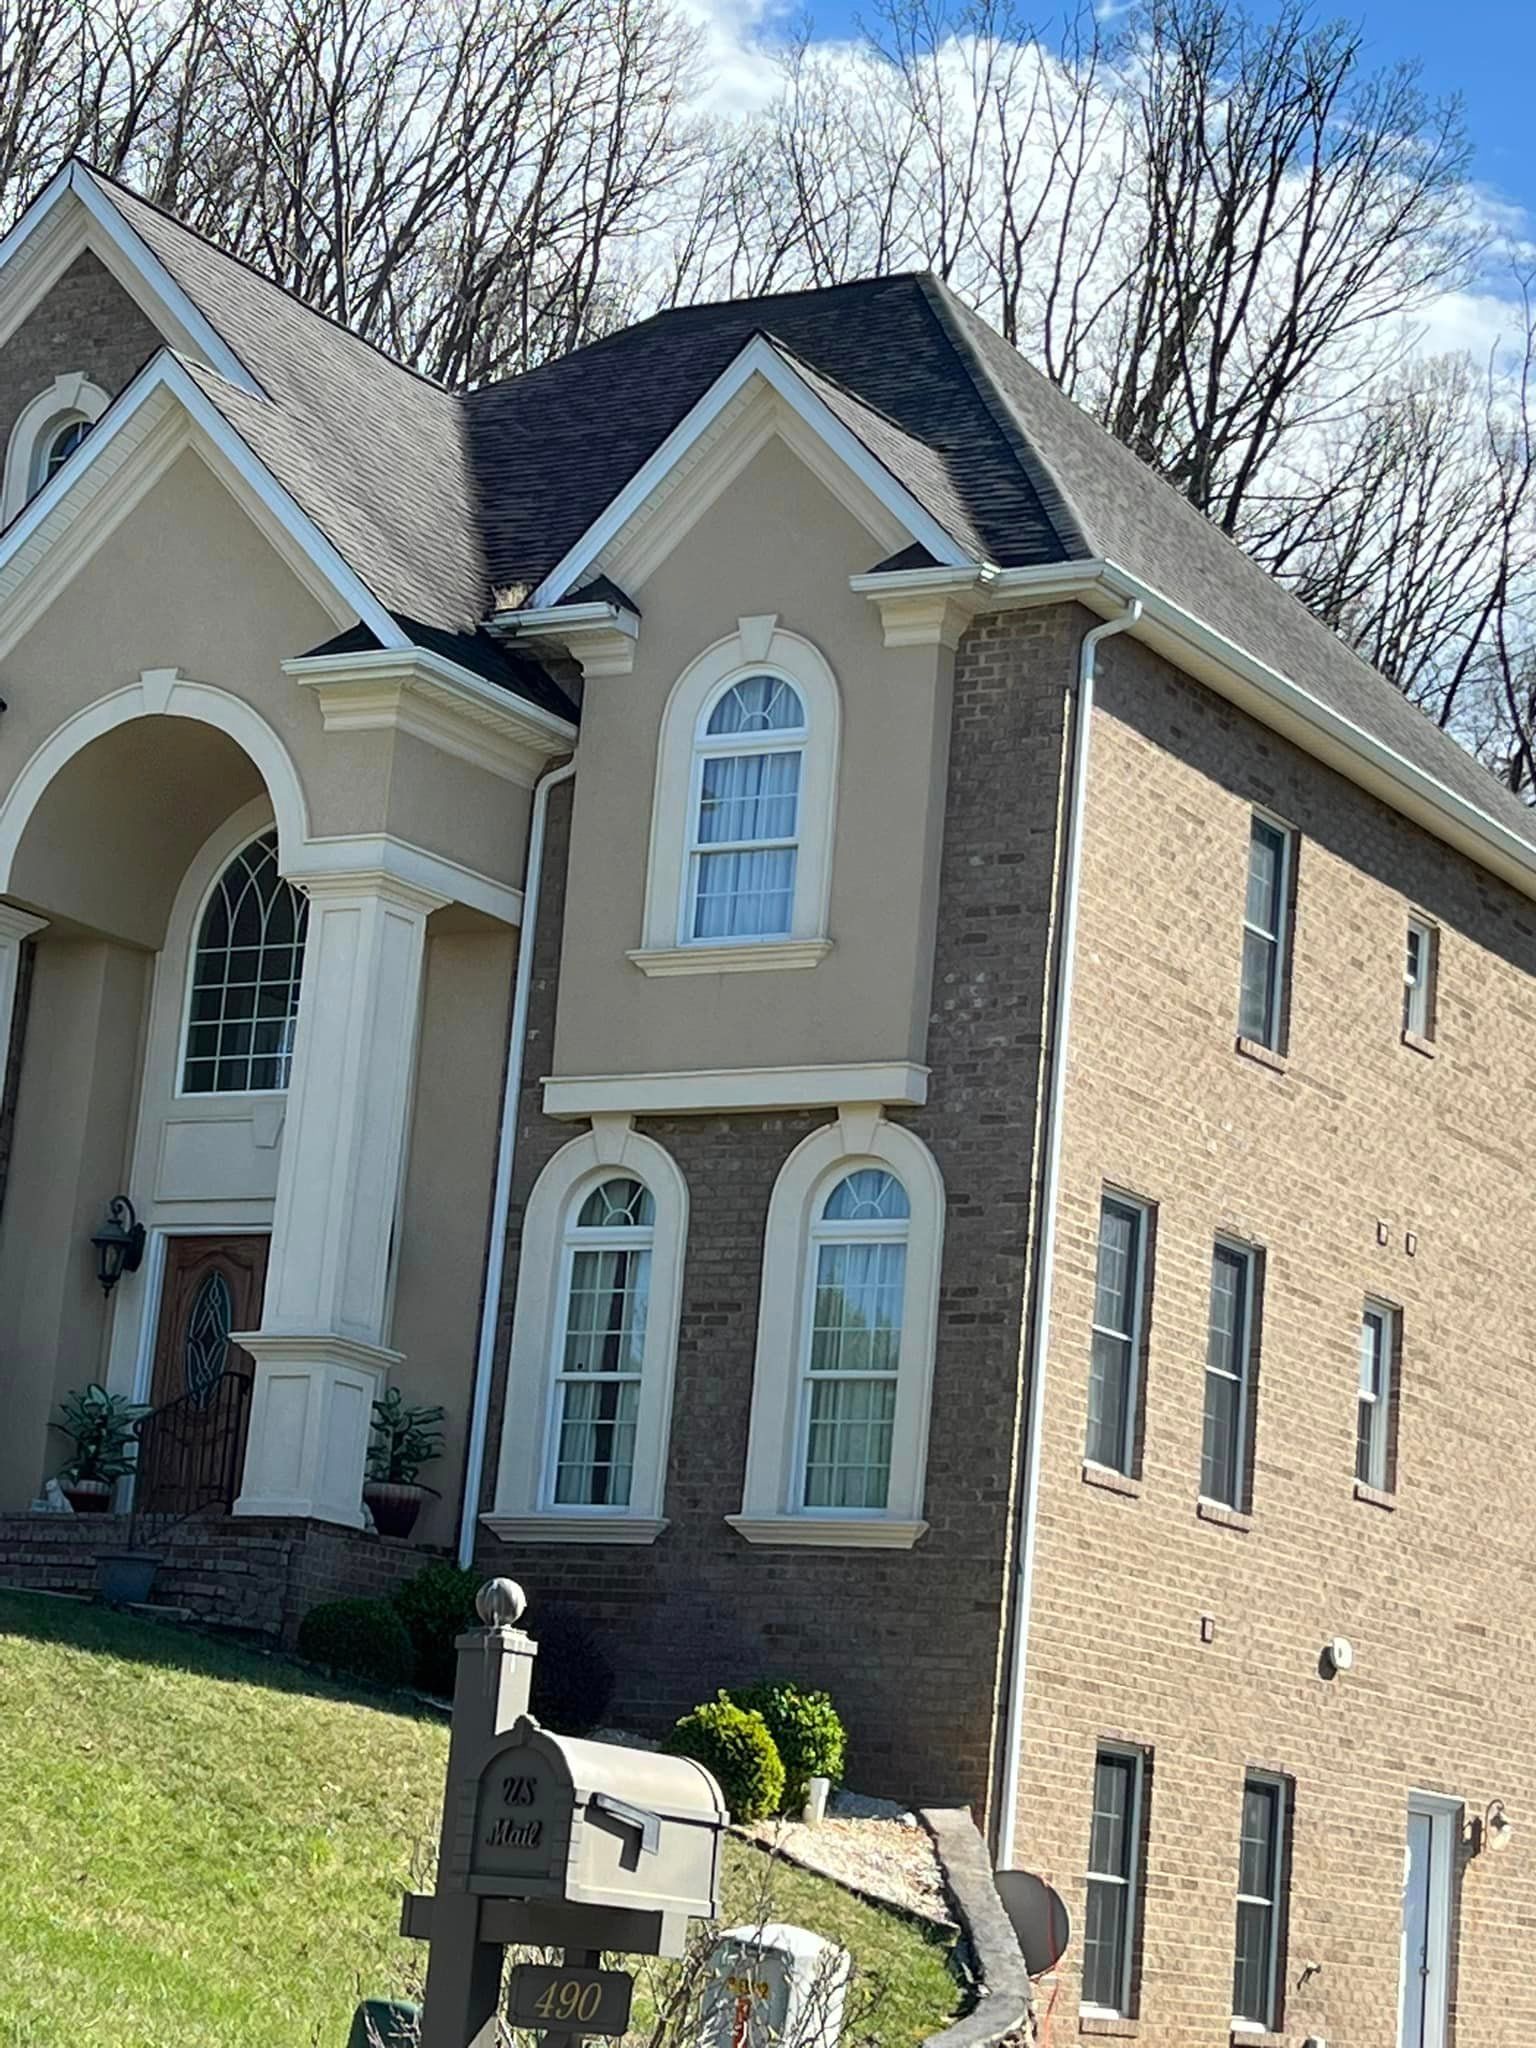 Exterior Painting for Top Notch Painting and Remodeling in Vinton, VA